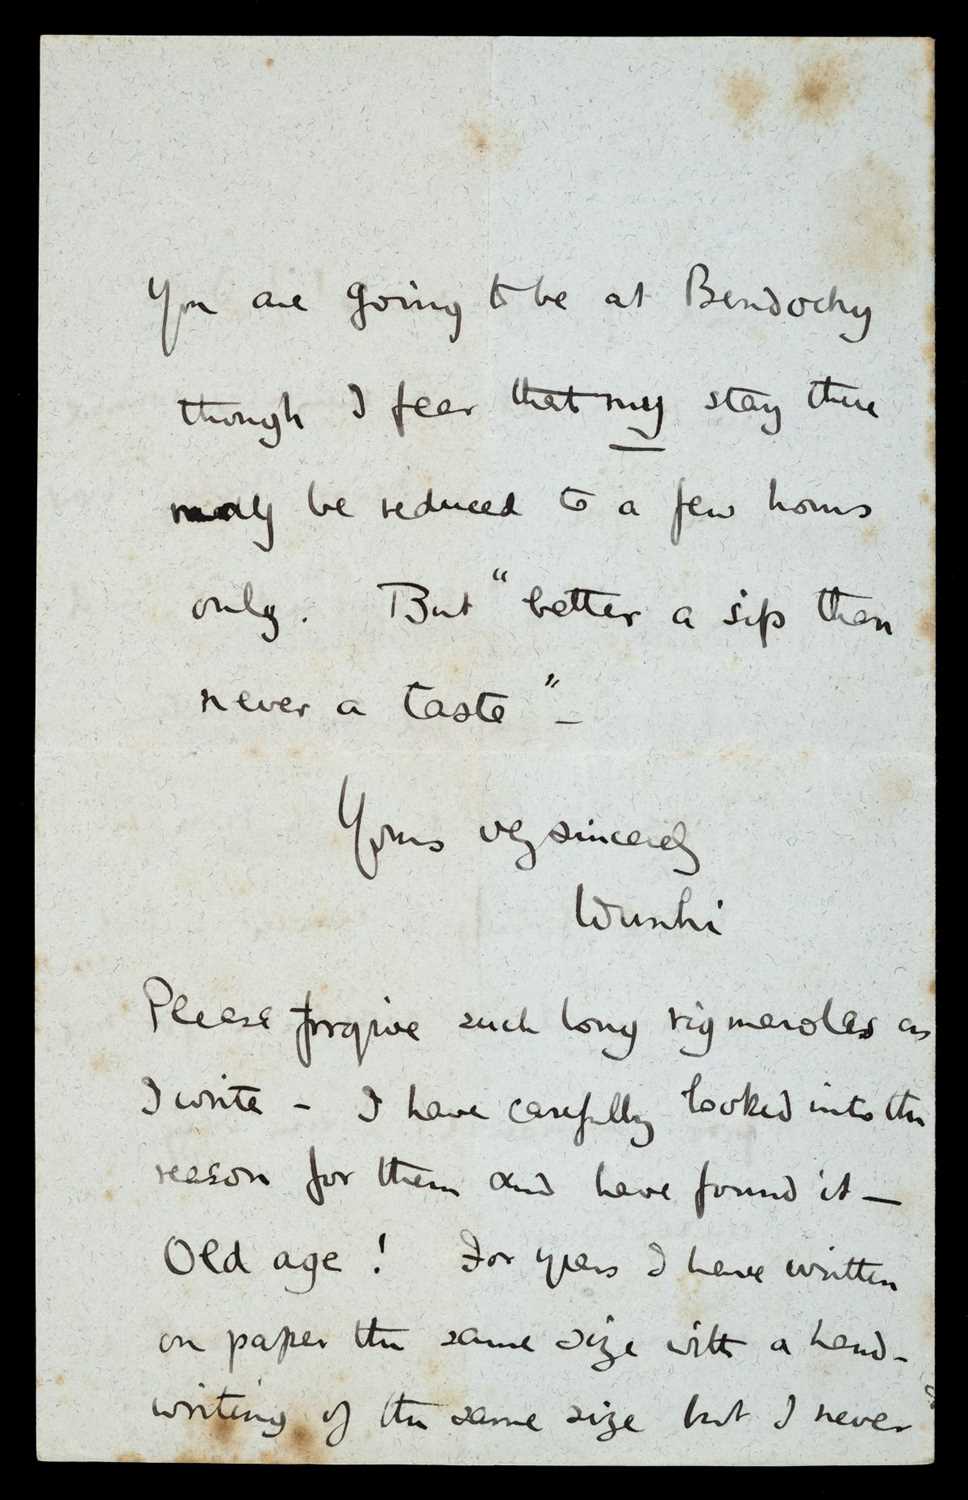 Lot 625 - Baden-Powell (Sir Robert, 1st Baron, 1857-1941). A long Autograph Letter Signed as ‘Wunhi’, 1897